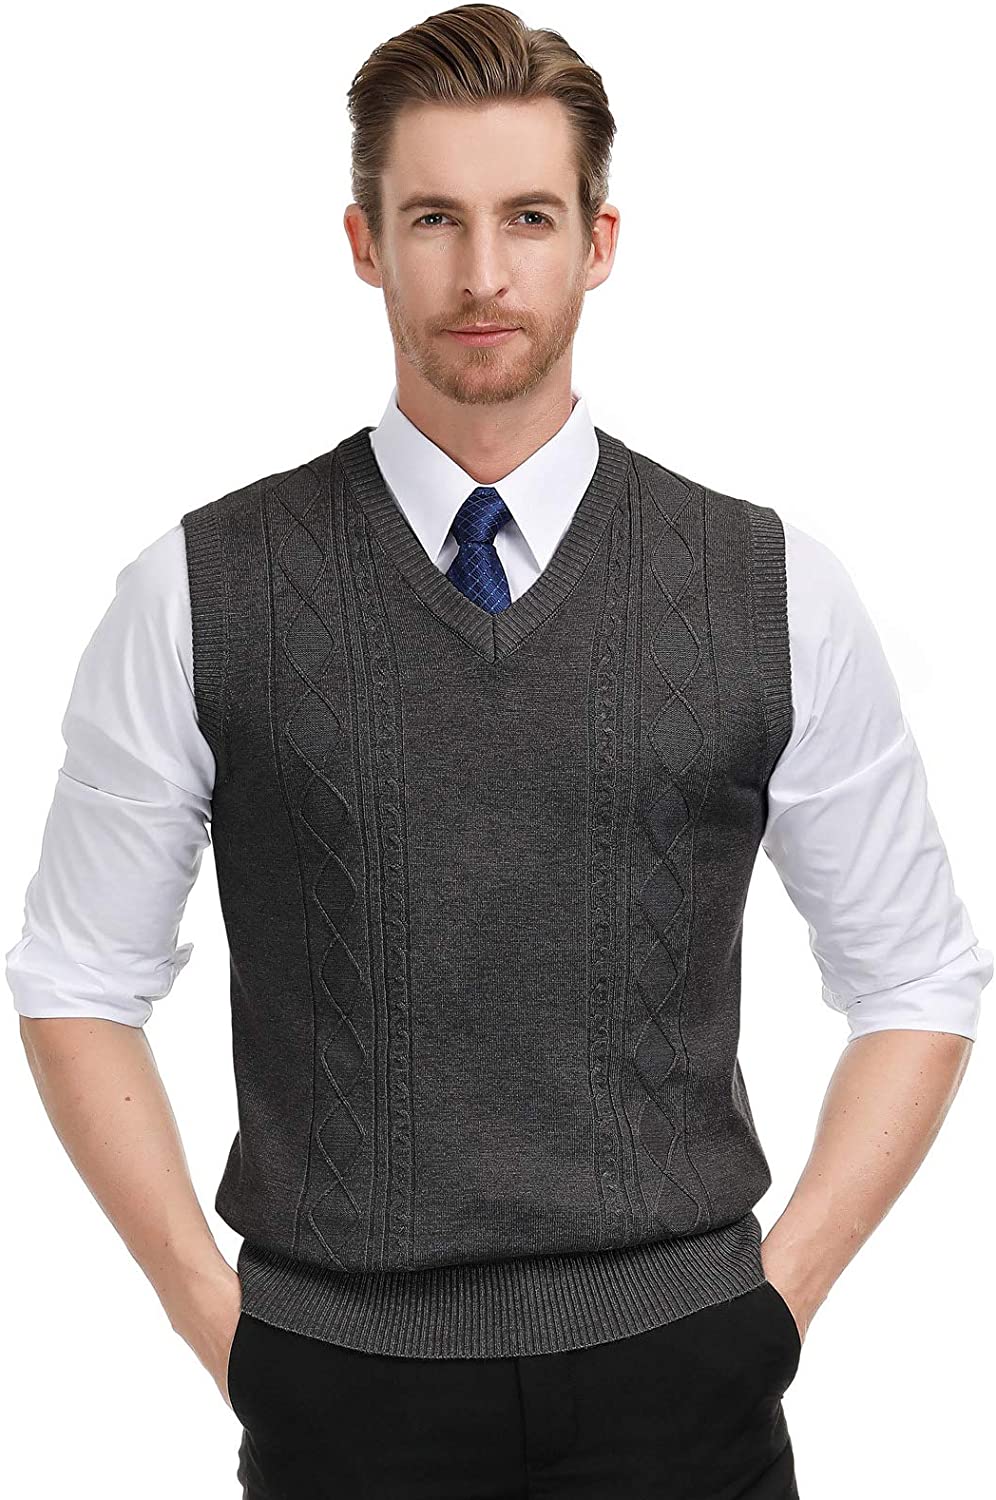 PAUL JONES Mens V Neck Sweater Vest Cable Knitted Pullover Sweaters Vest 